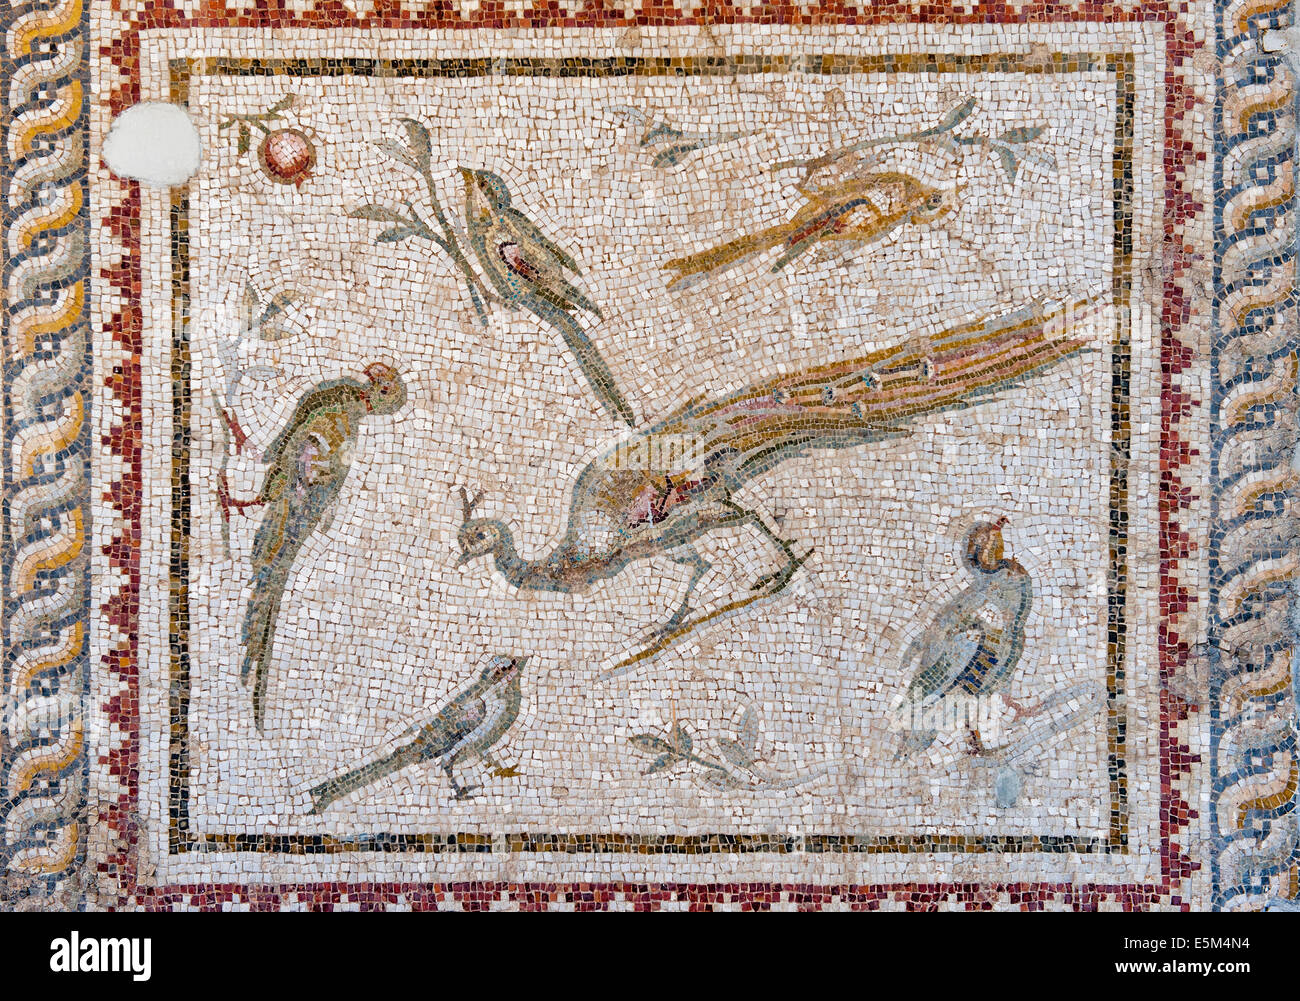 Mosaic of Birds and flowers from Daphne (Harbiye), 2nd Cent A.C., Hatay Archaeology Museum, Antioch, Southwest Turkey Stock Photo